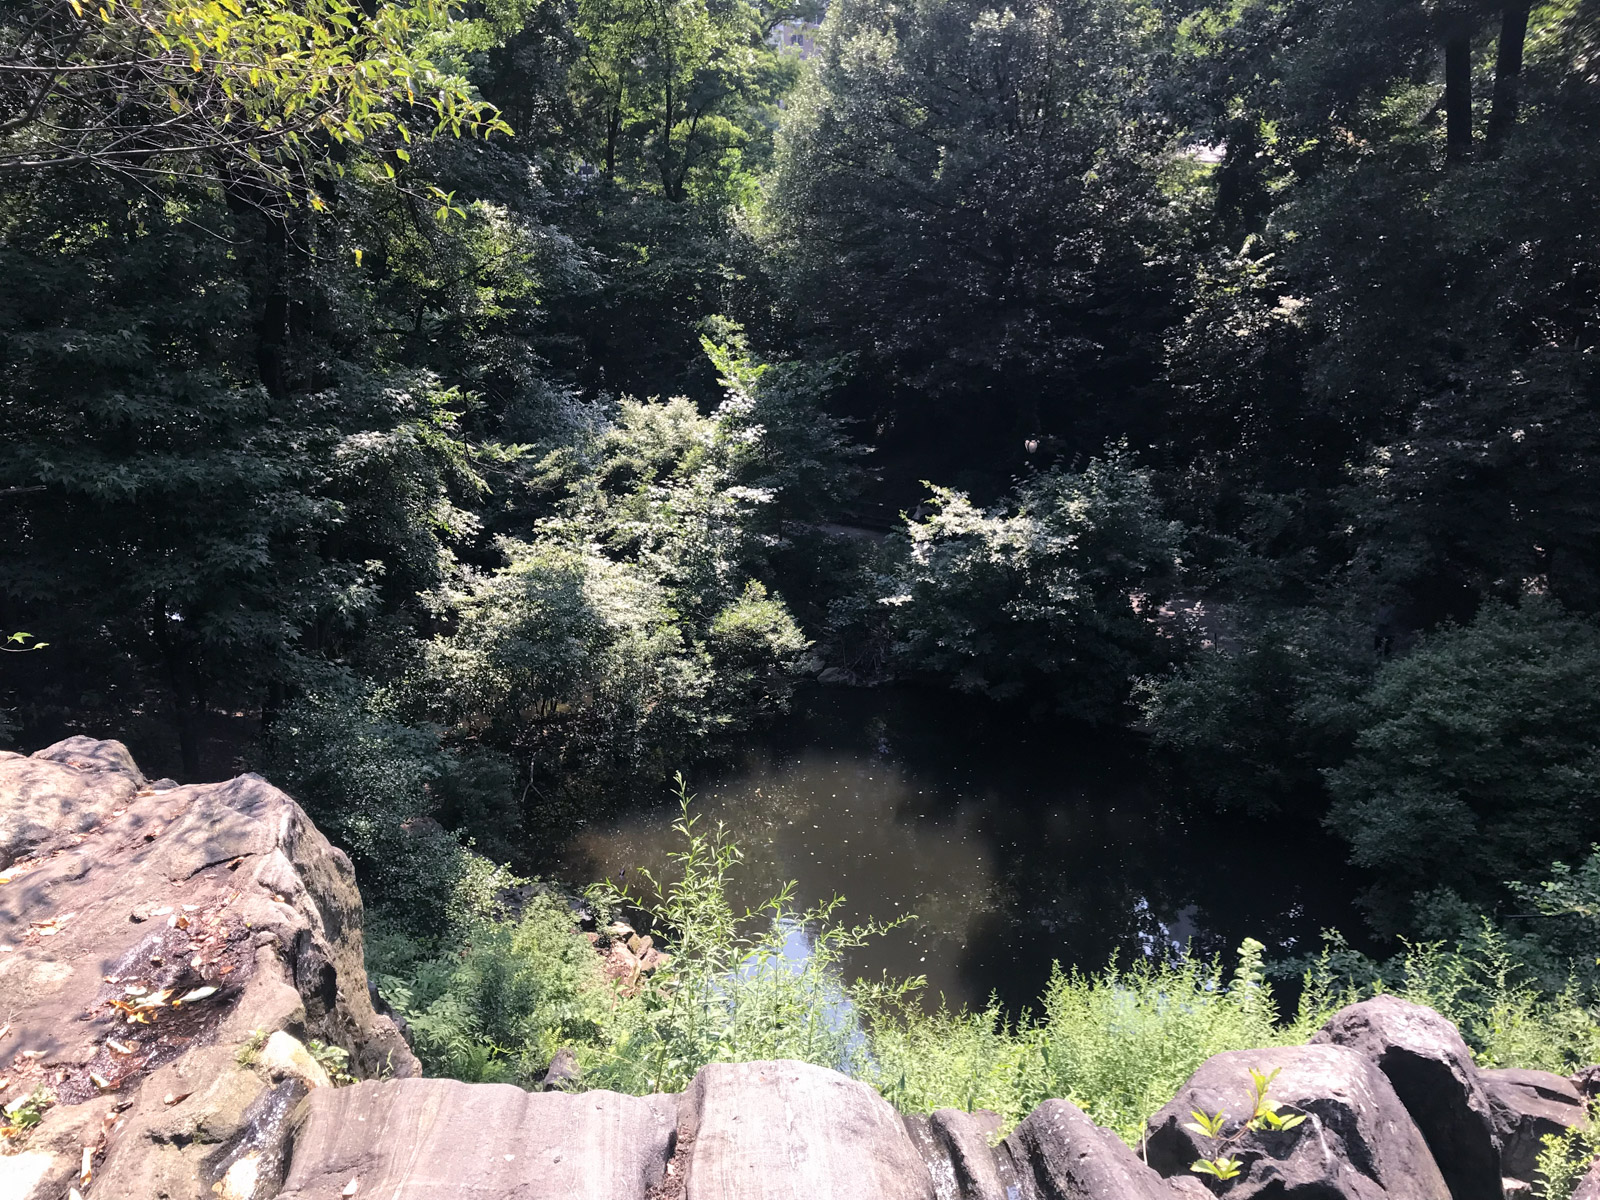 A pond as seen from the edge of a small cliff. Surrounding the water are many trees